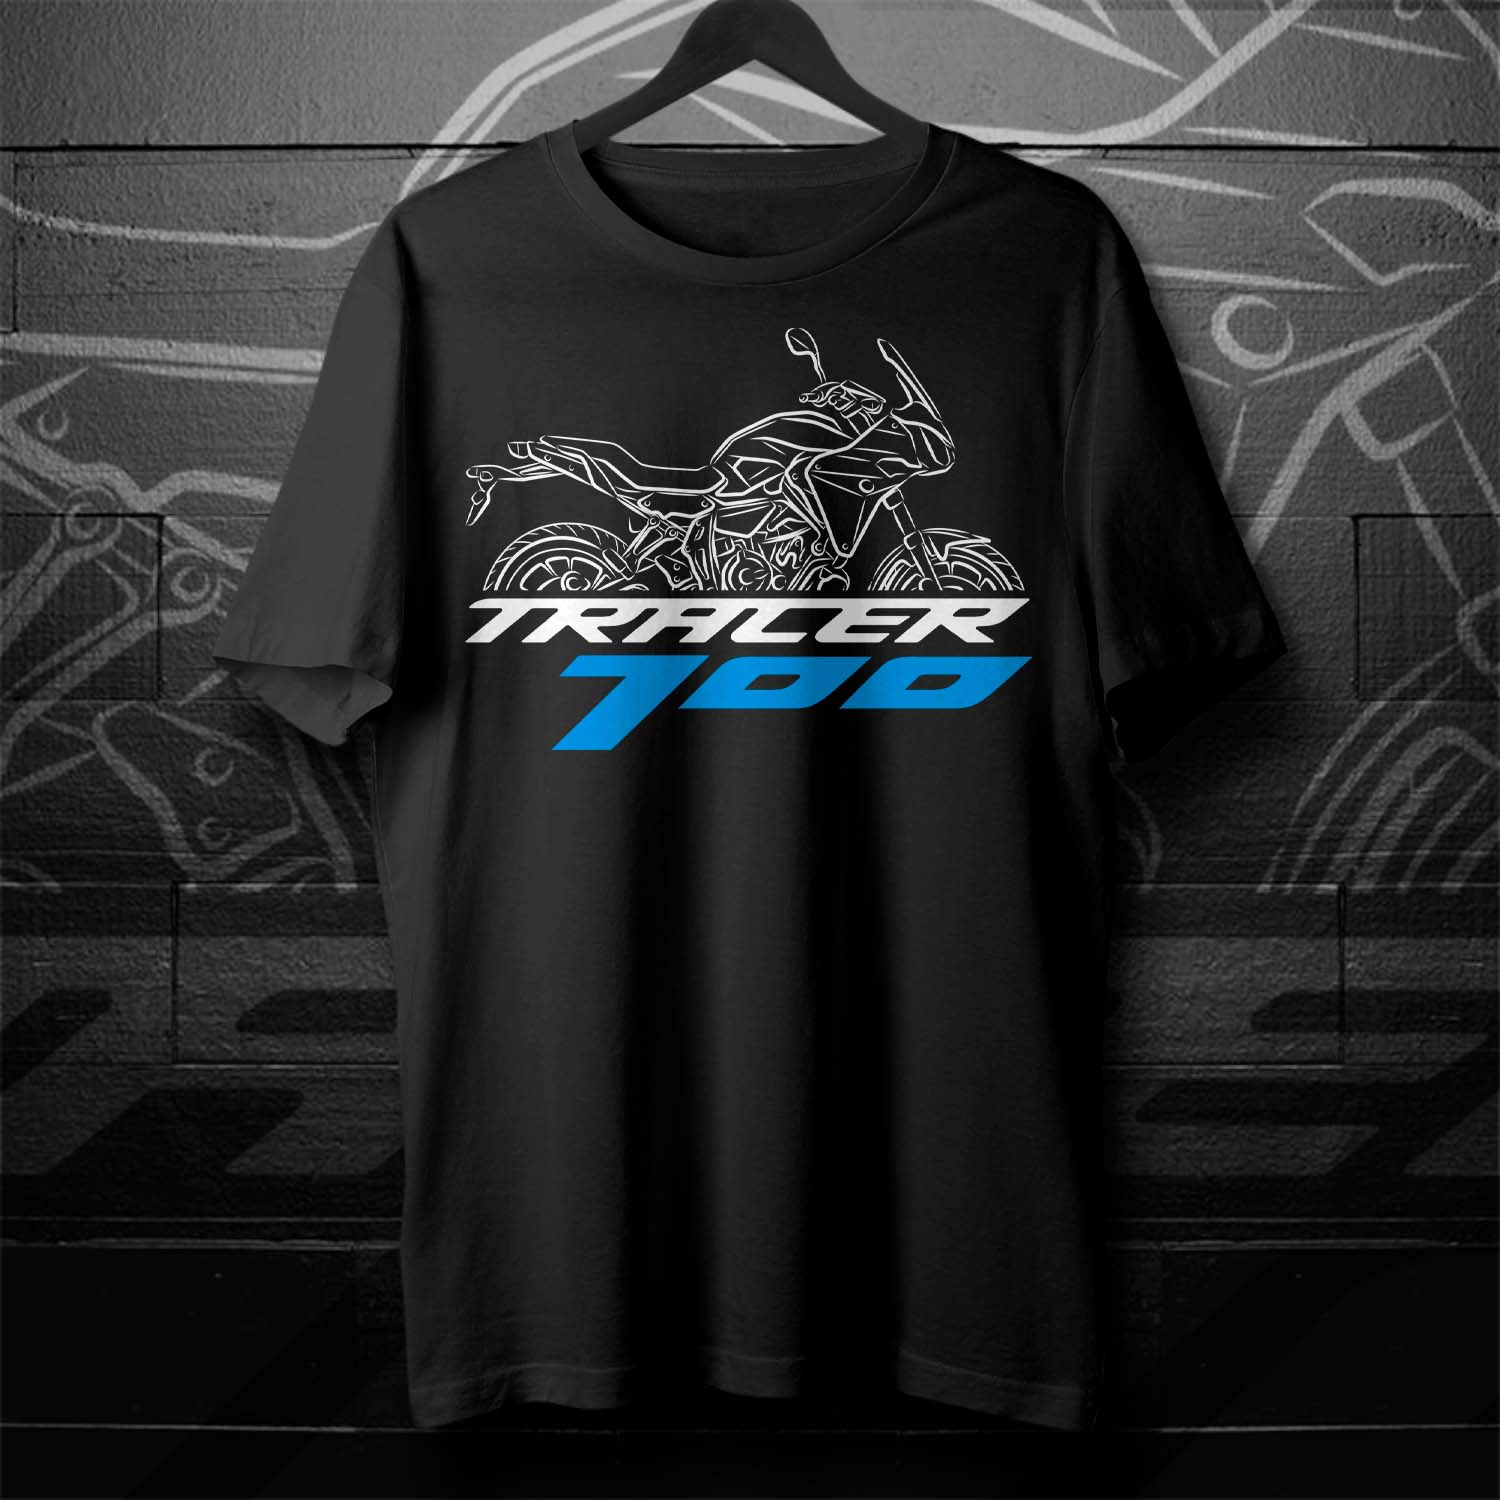 T-shirt Yamaha Tracer 700 for Motorcycle Riders